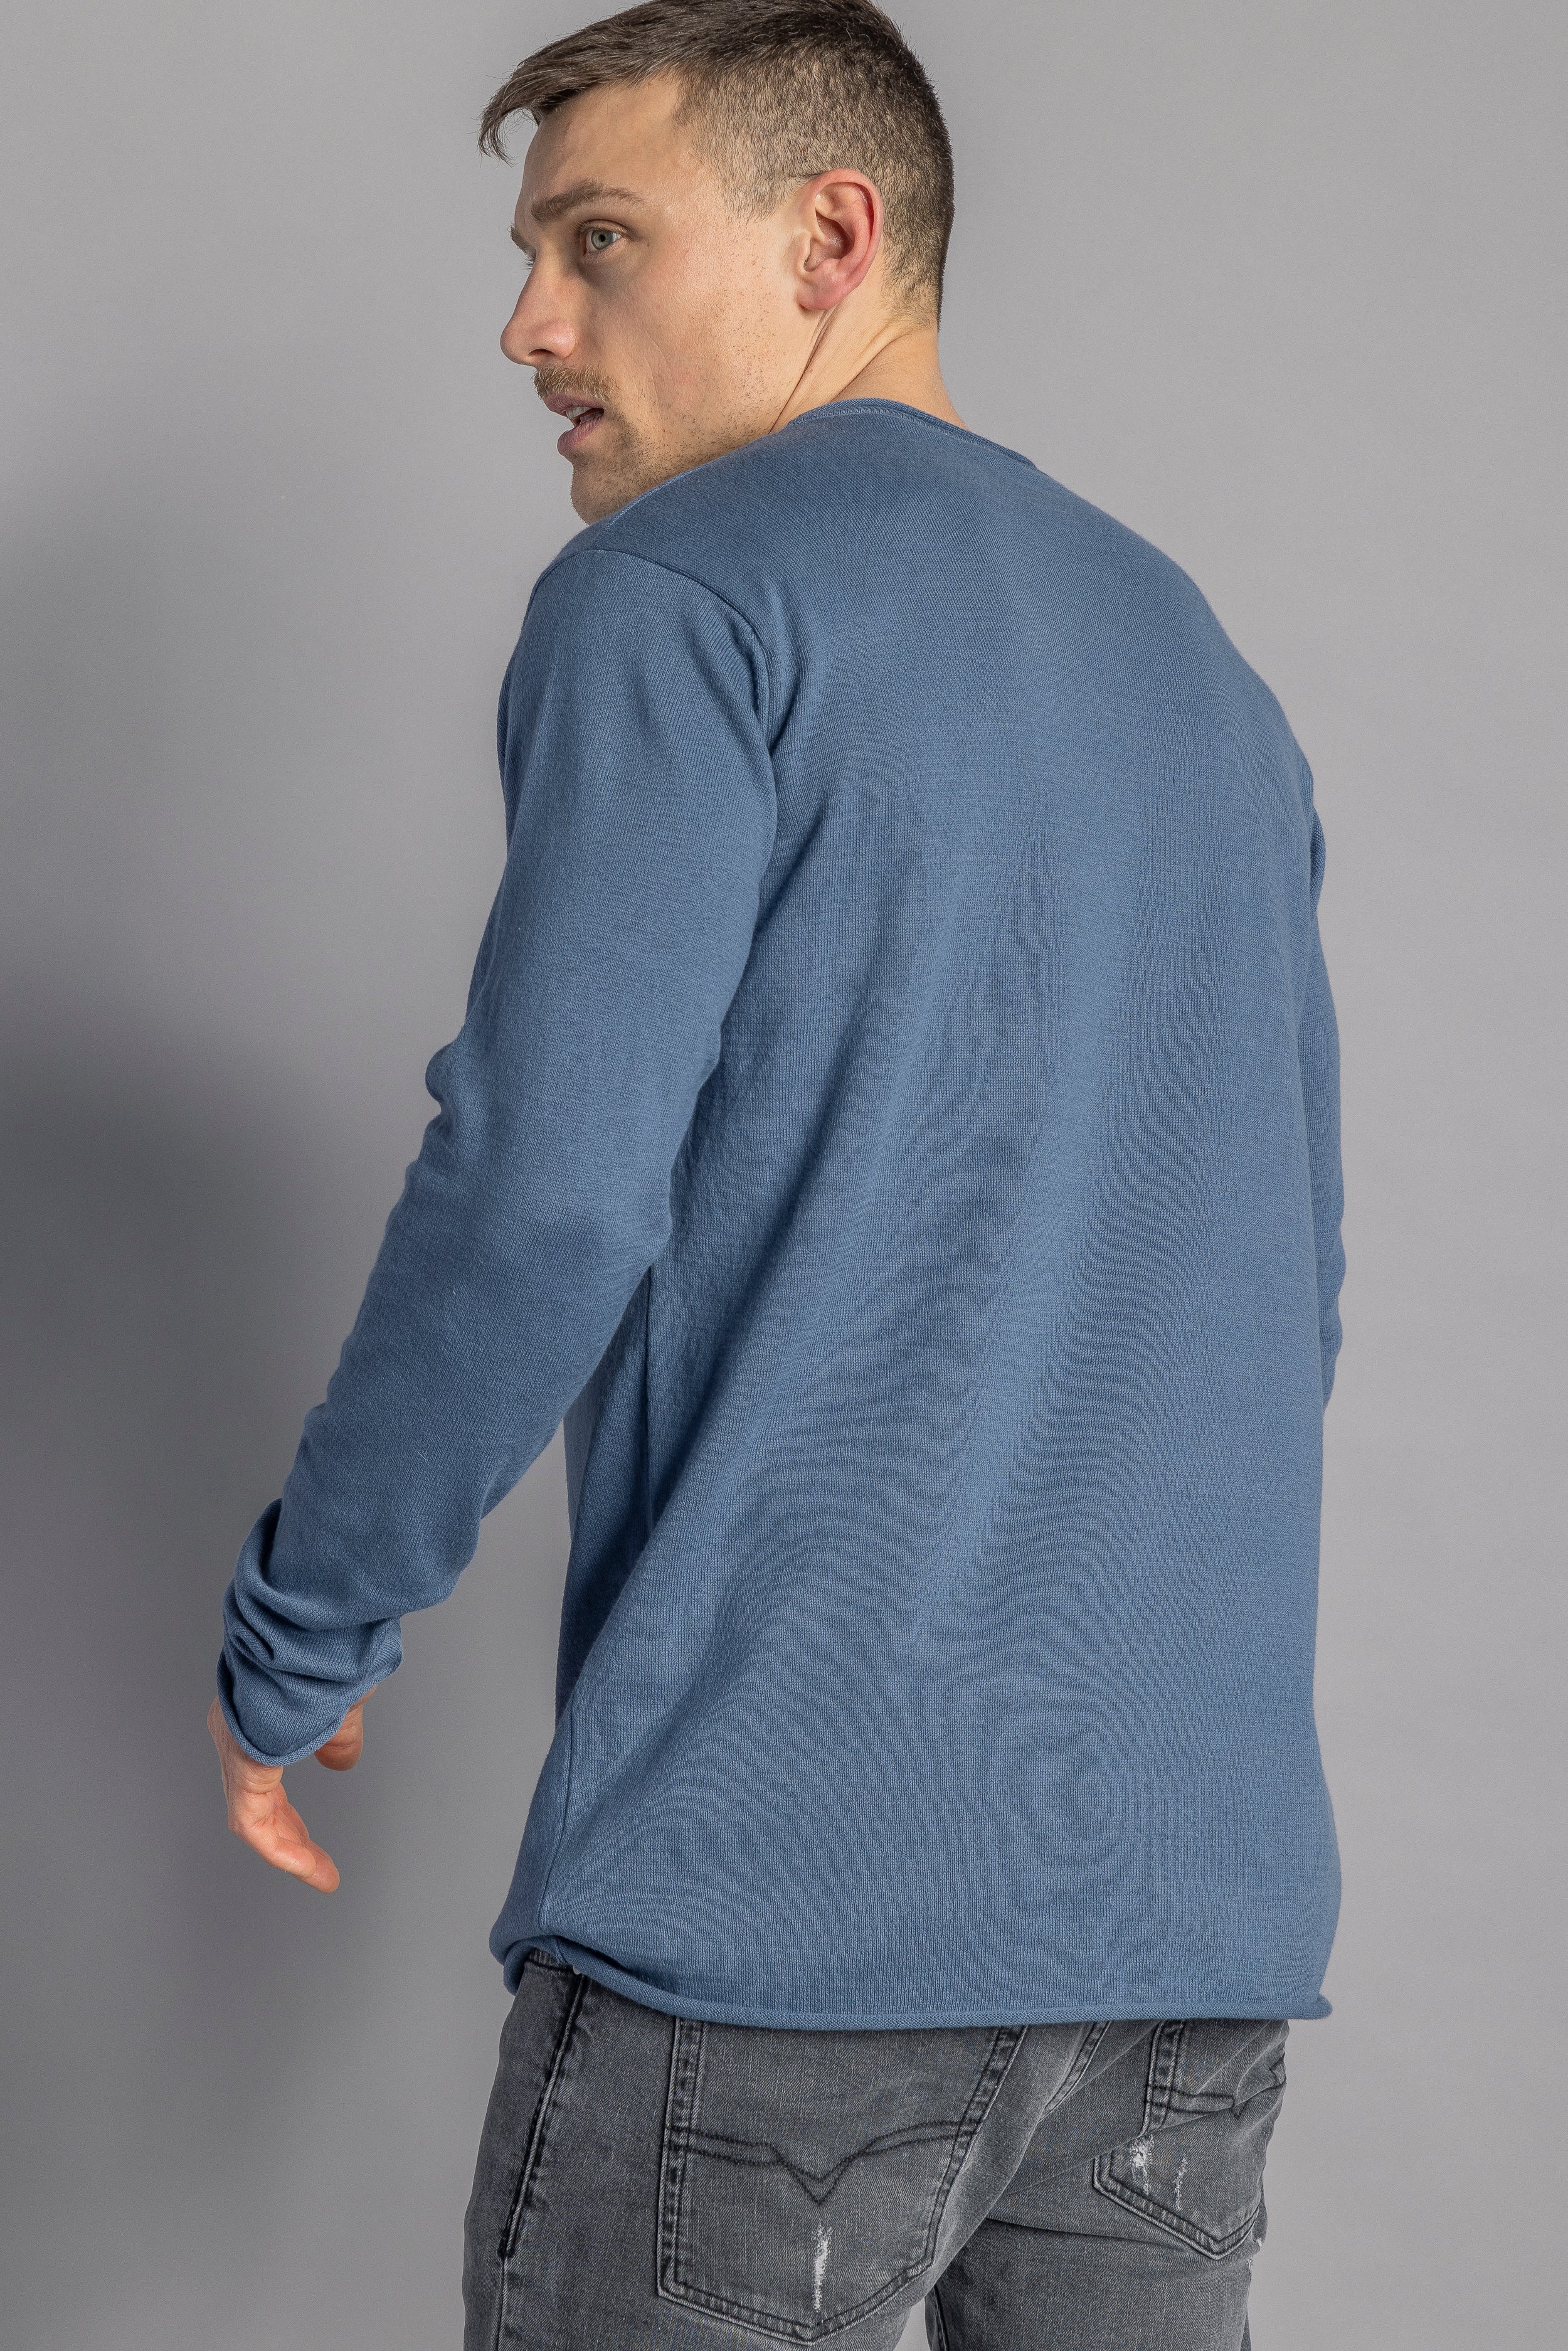 Blue knitted long-sleeve sweater made of 100% organic cotton from DIRTS